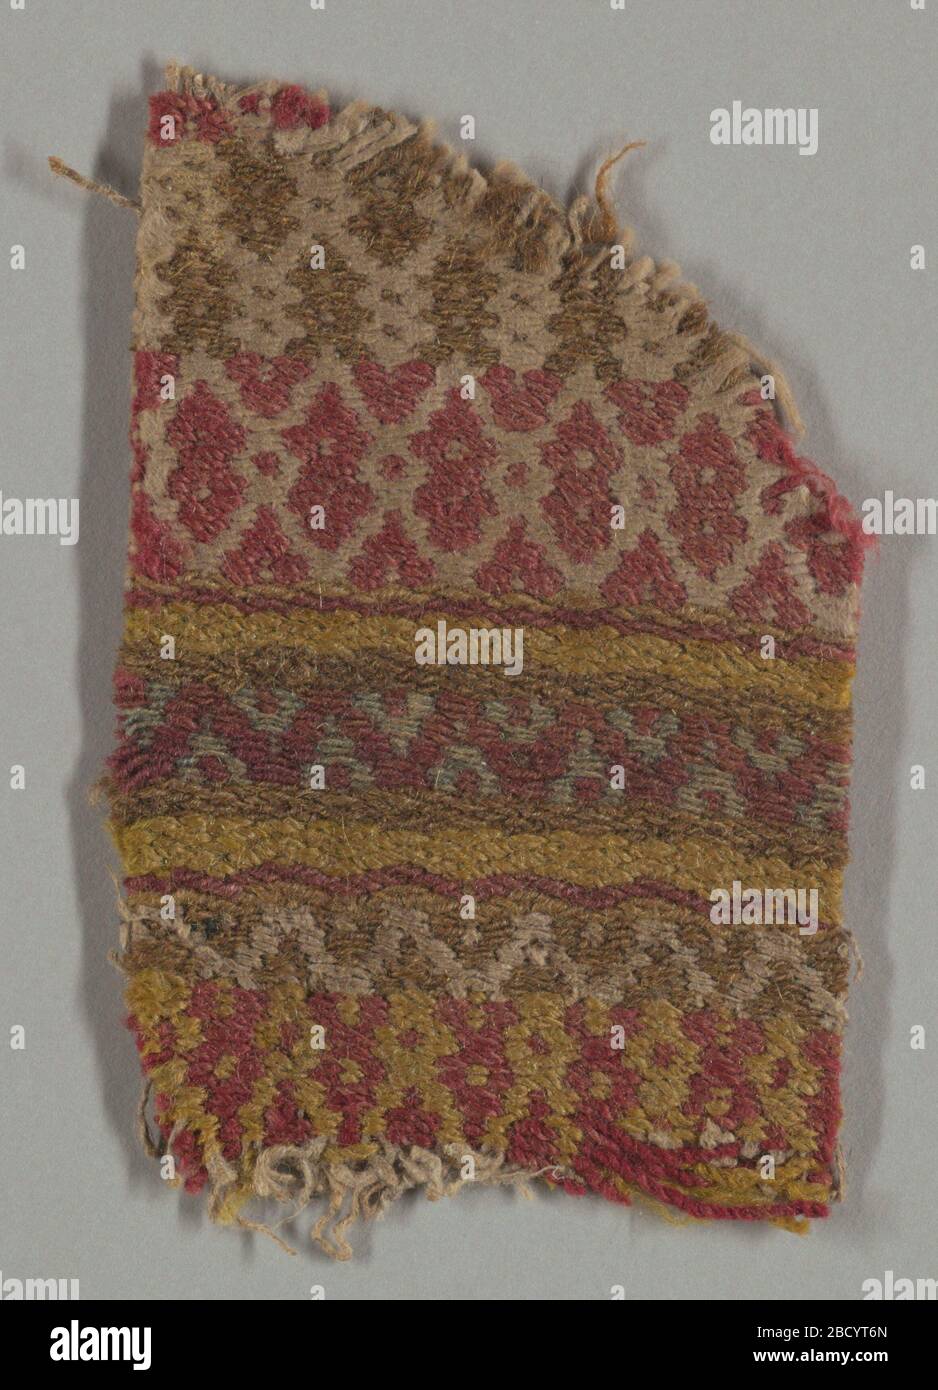 Textile. Research in ProgressCoarse wool and hand-spun linen in brown, yellow, red, and white. Patterning of simple geometric bands and lozenges. Patterned by weft floats that hide warps entirely. Textile Stock Photo